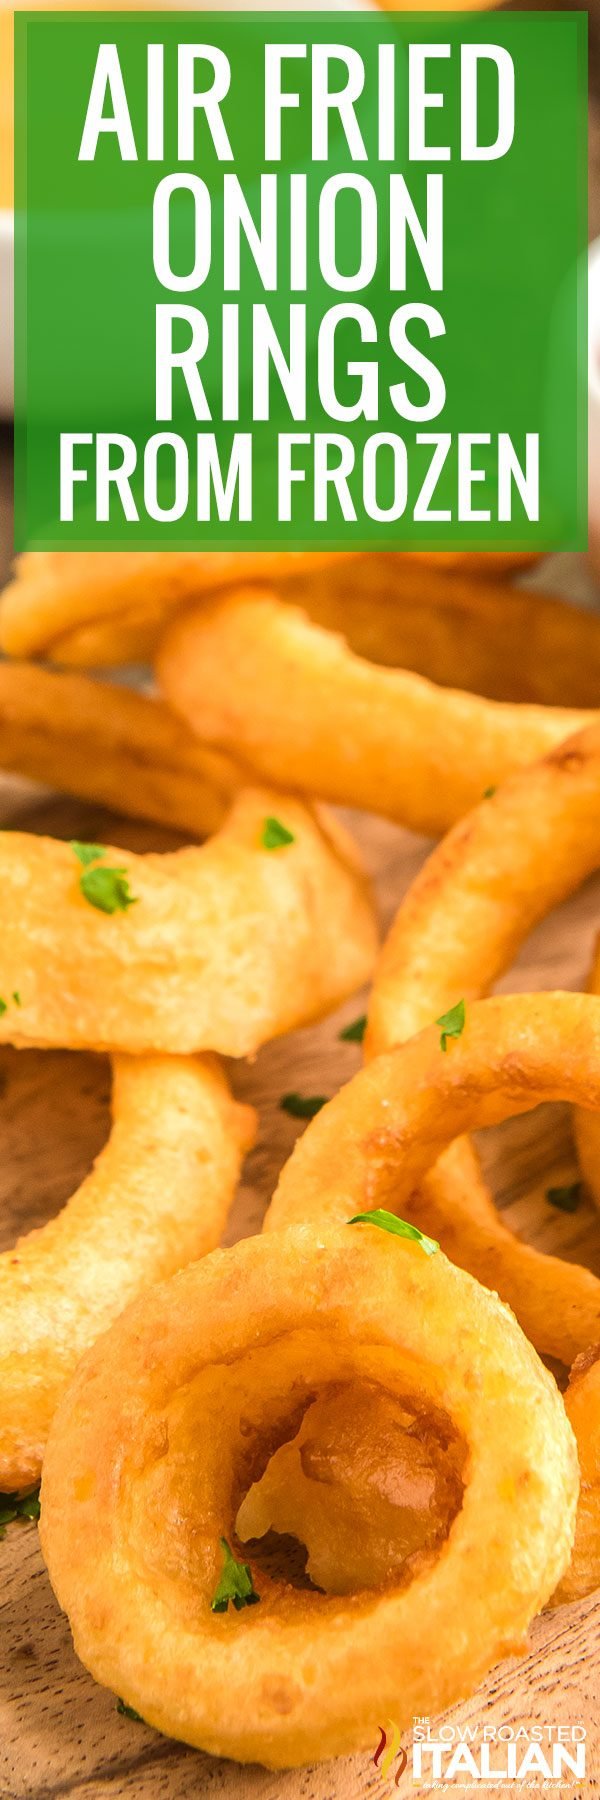 air-fried-onion-rings-from-frozen-pin-3909671